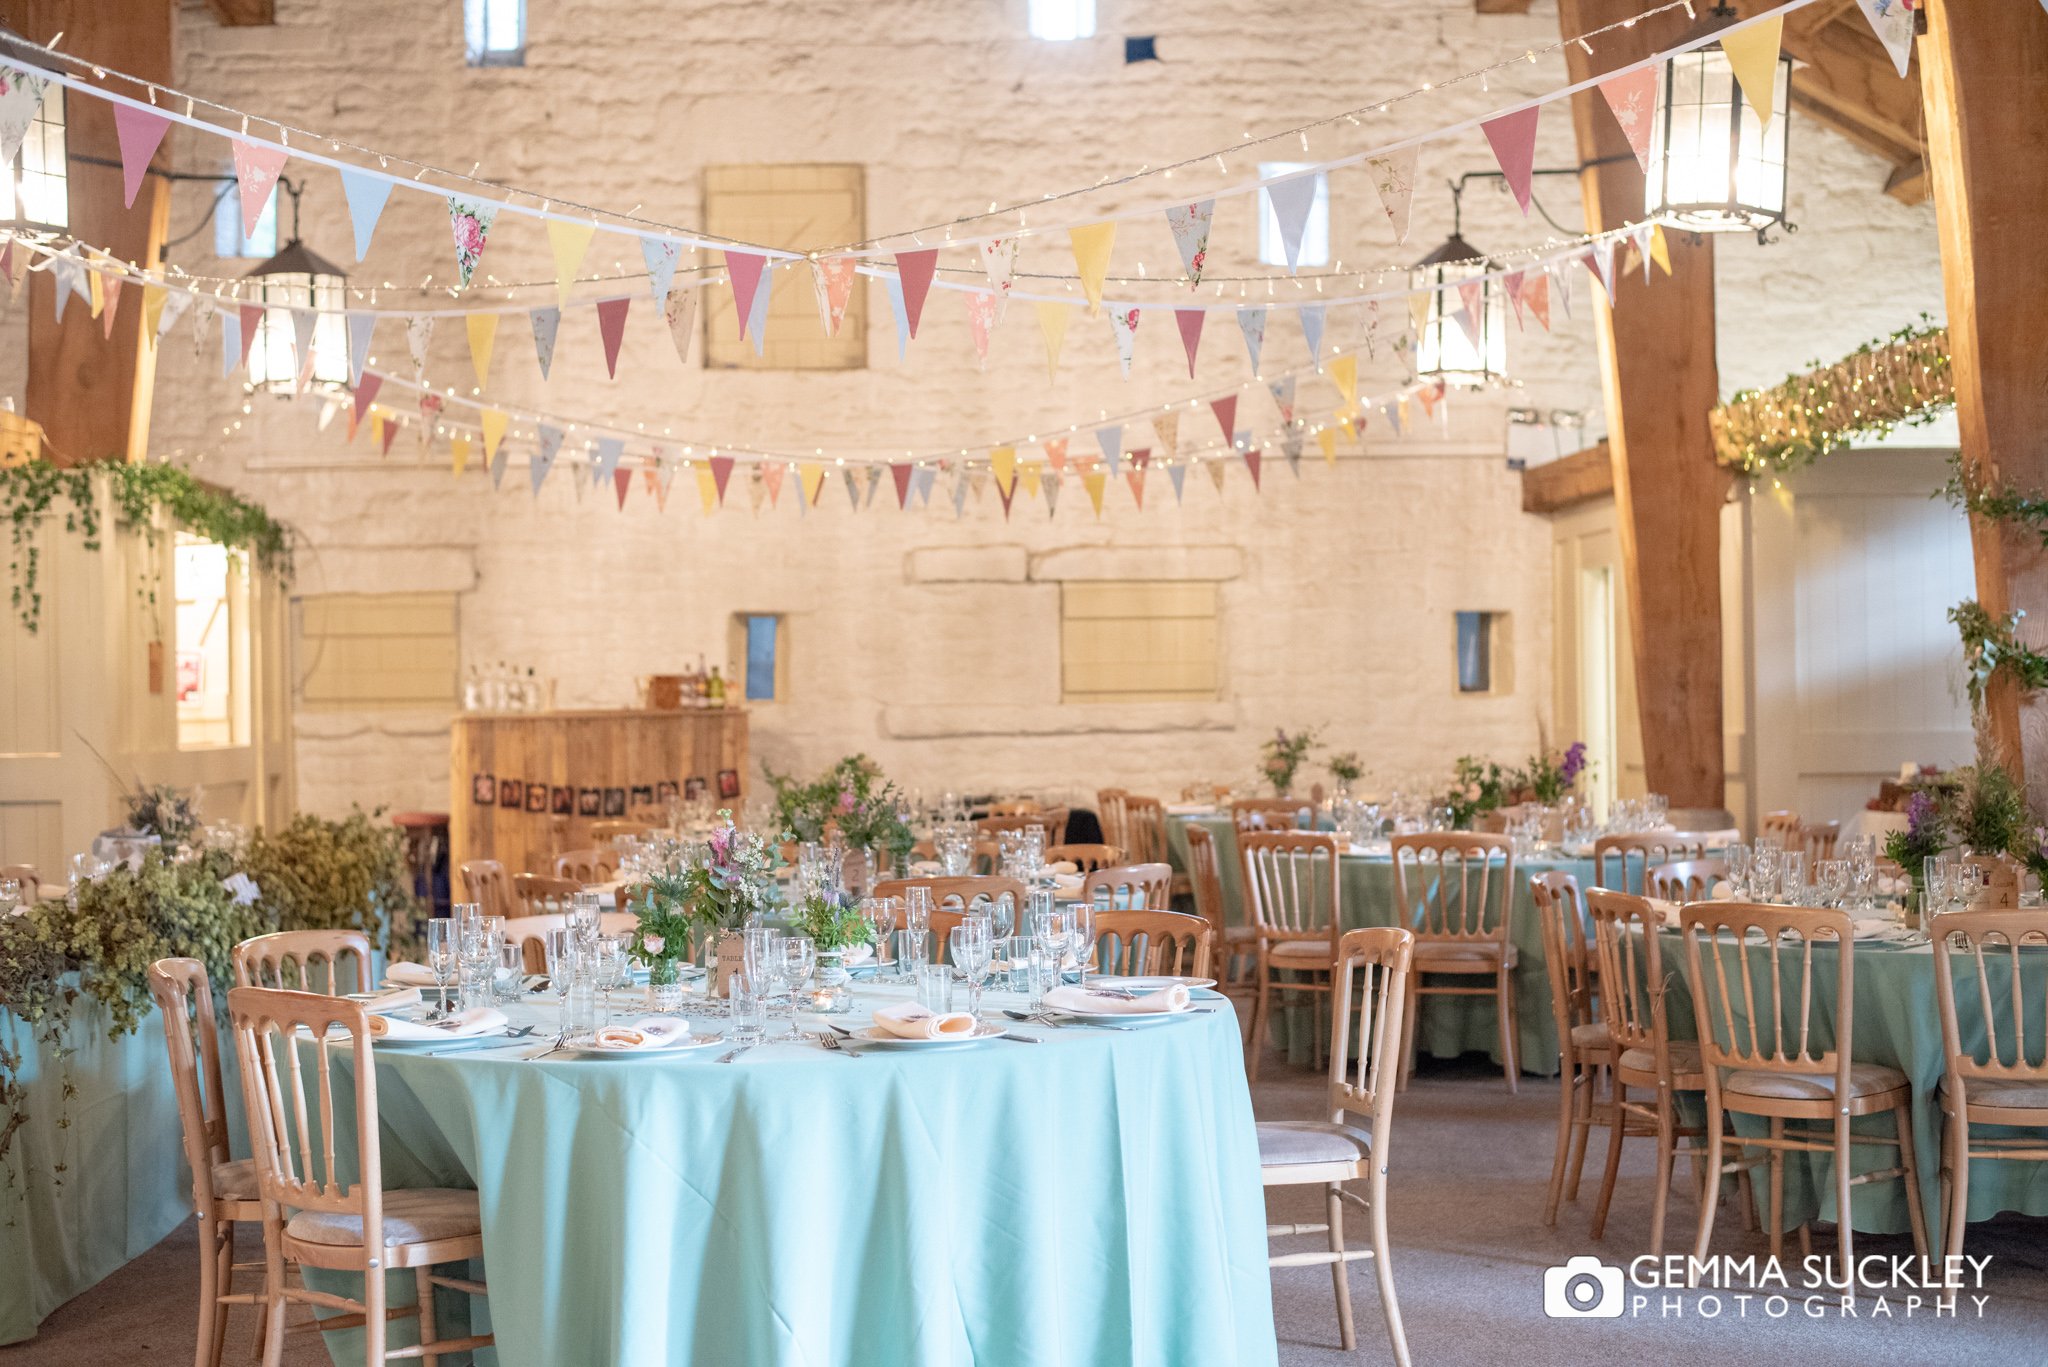 a photo of the barn set up for wedding breakfast at east riddleden hall